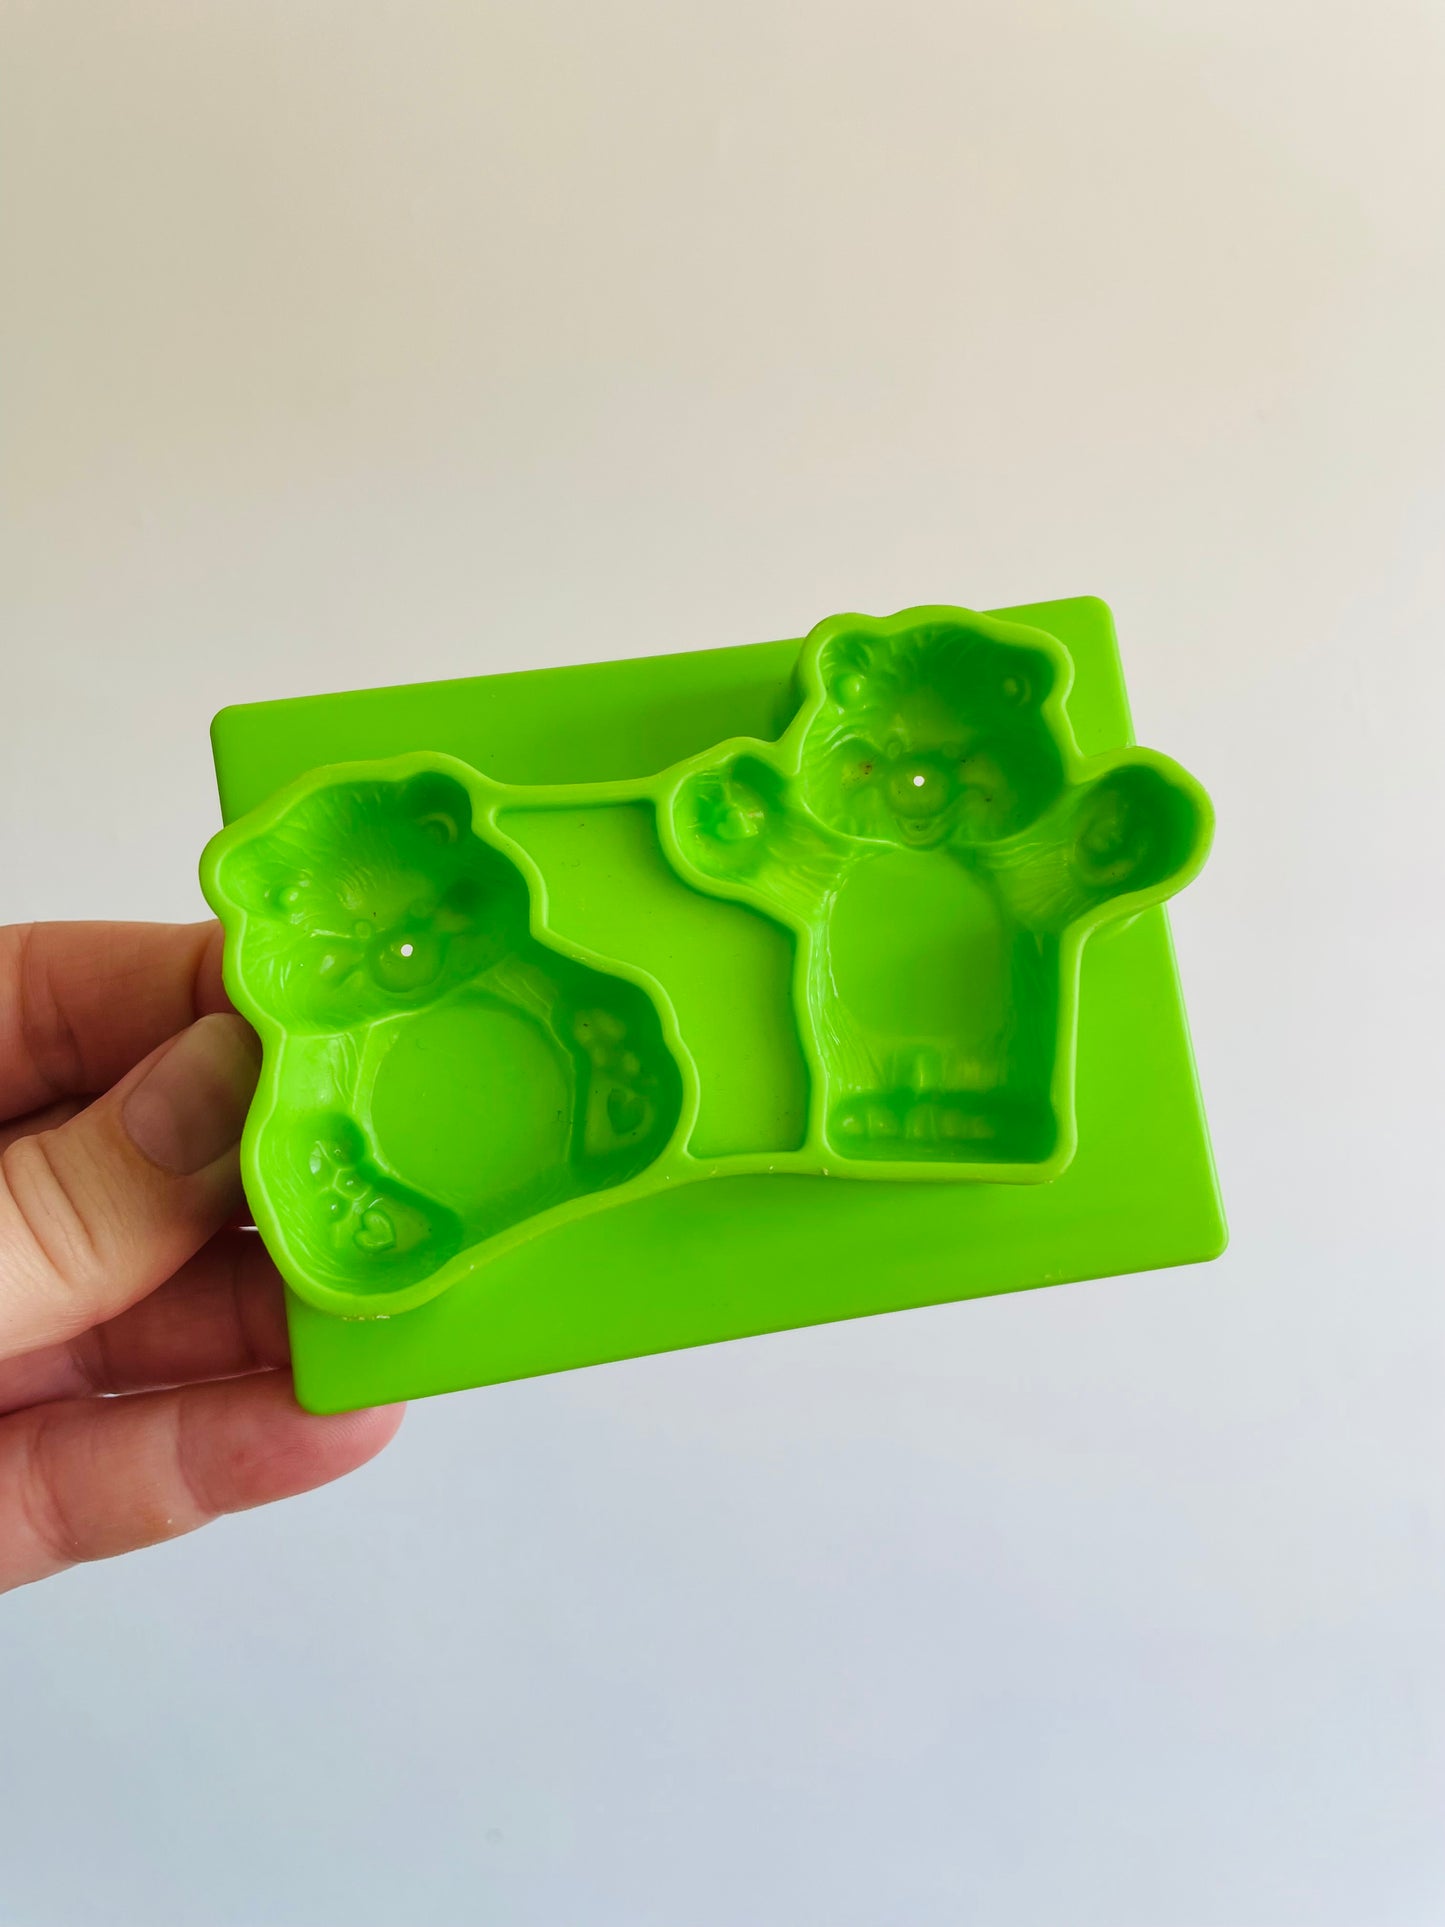 1983 American Greetings Corp Care Bears Play-Doh Molds - Set of 4 Pieces - Cloud Car & Molds for Bears and Symbols